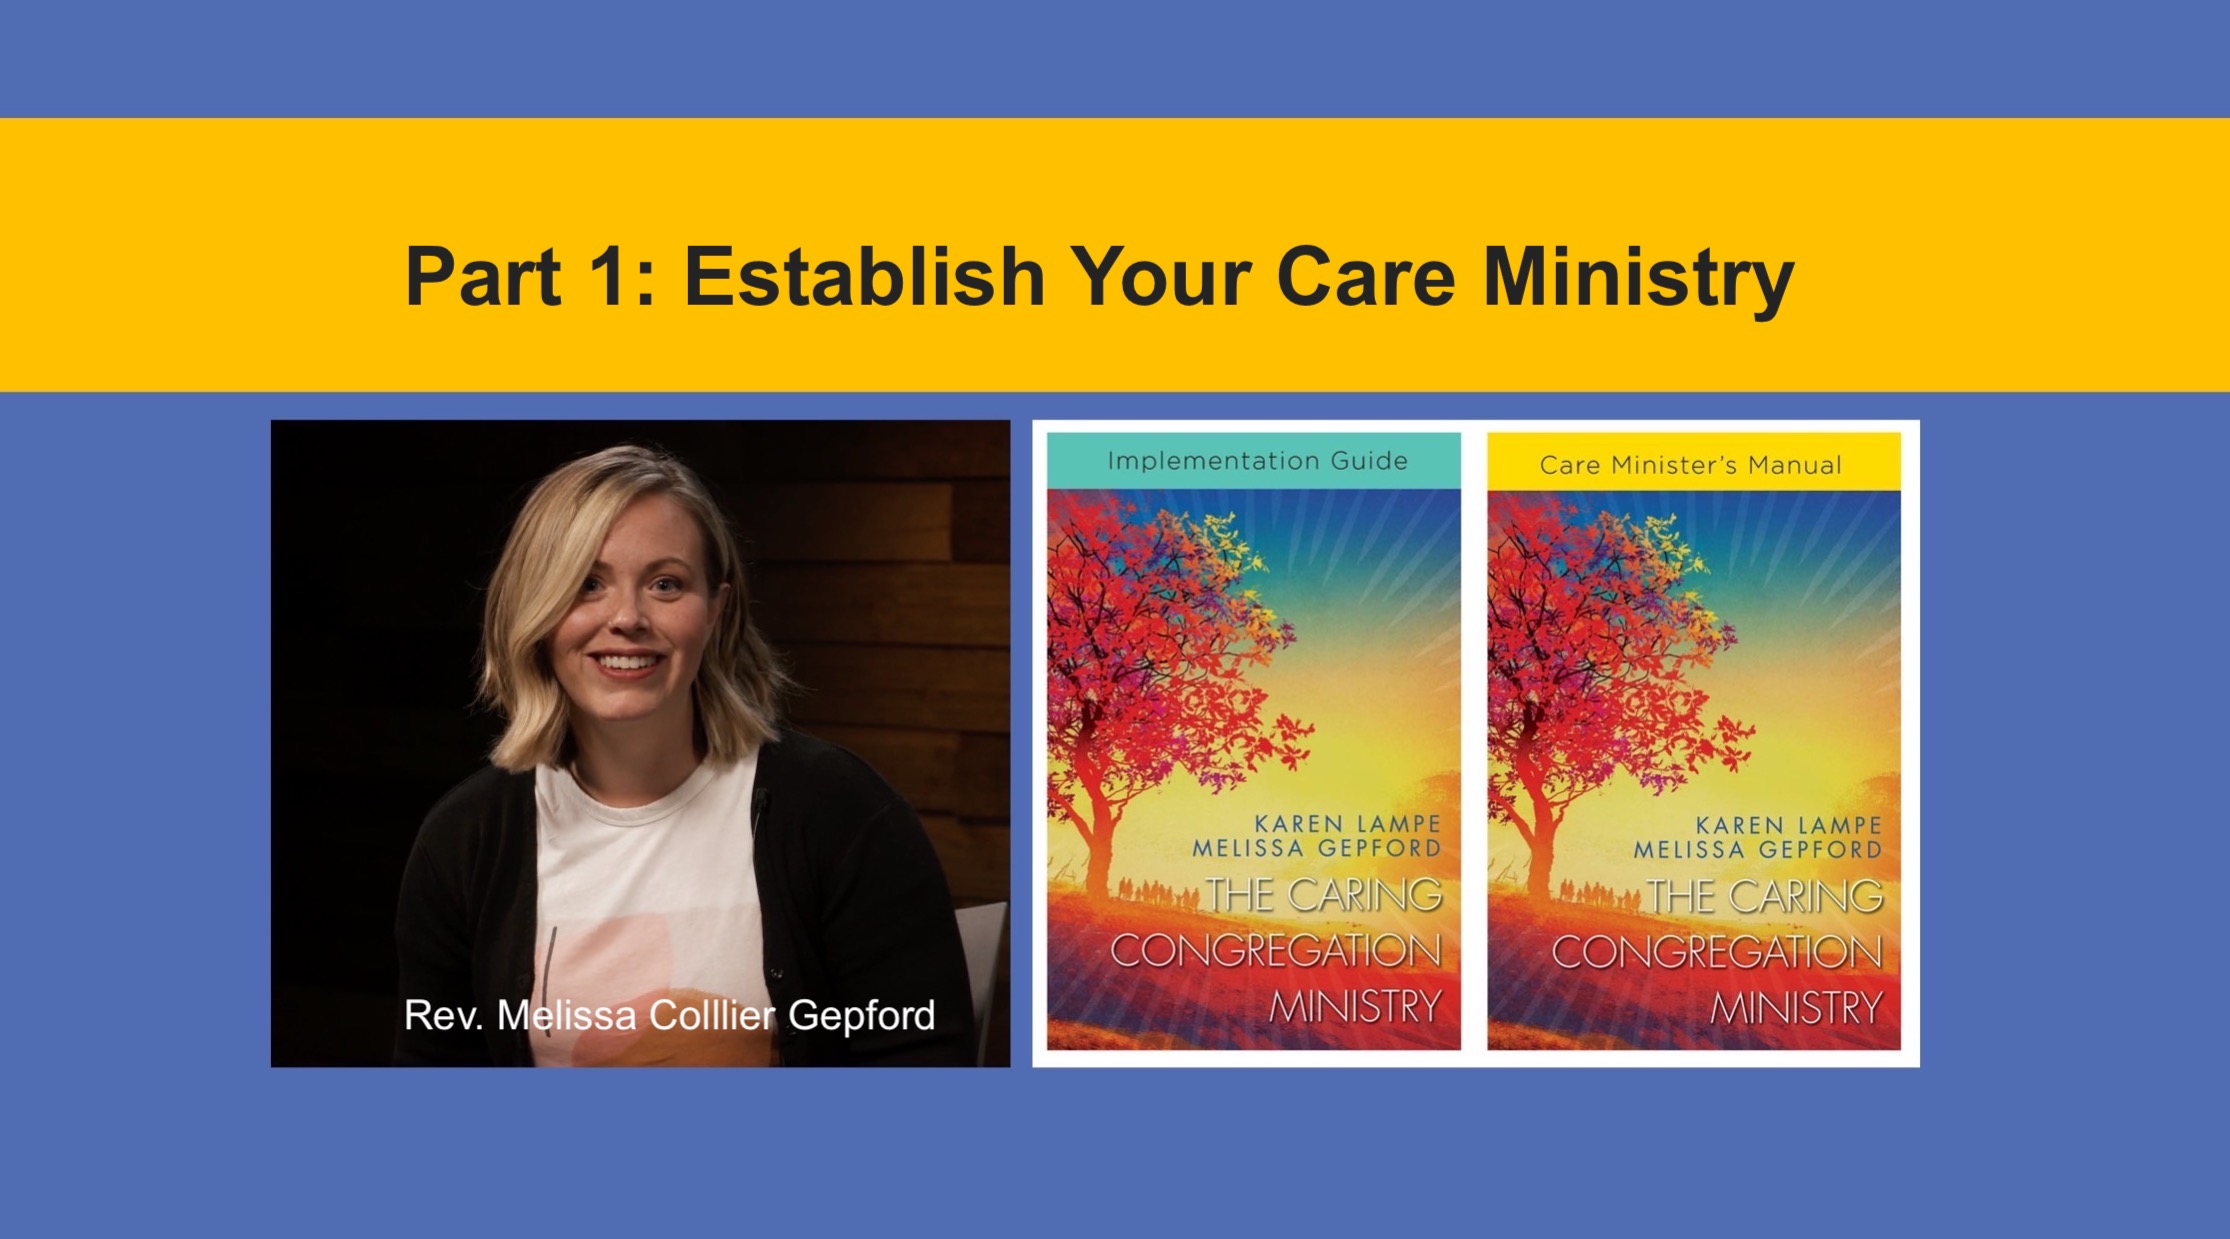 Part 1: Establishing a Care Ministry